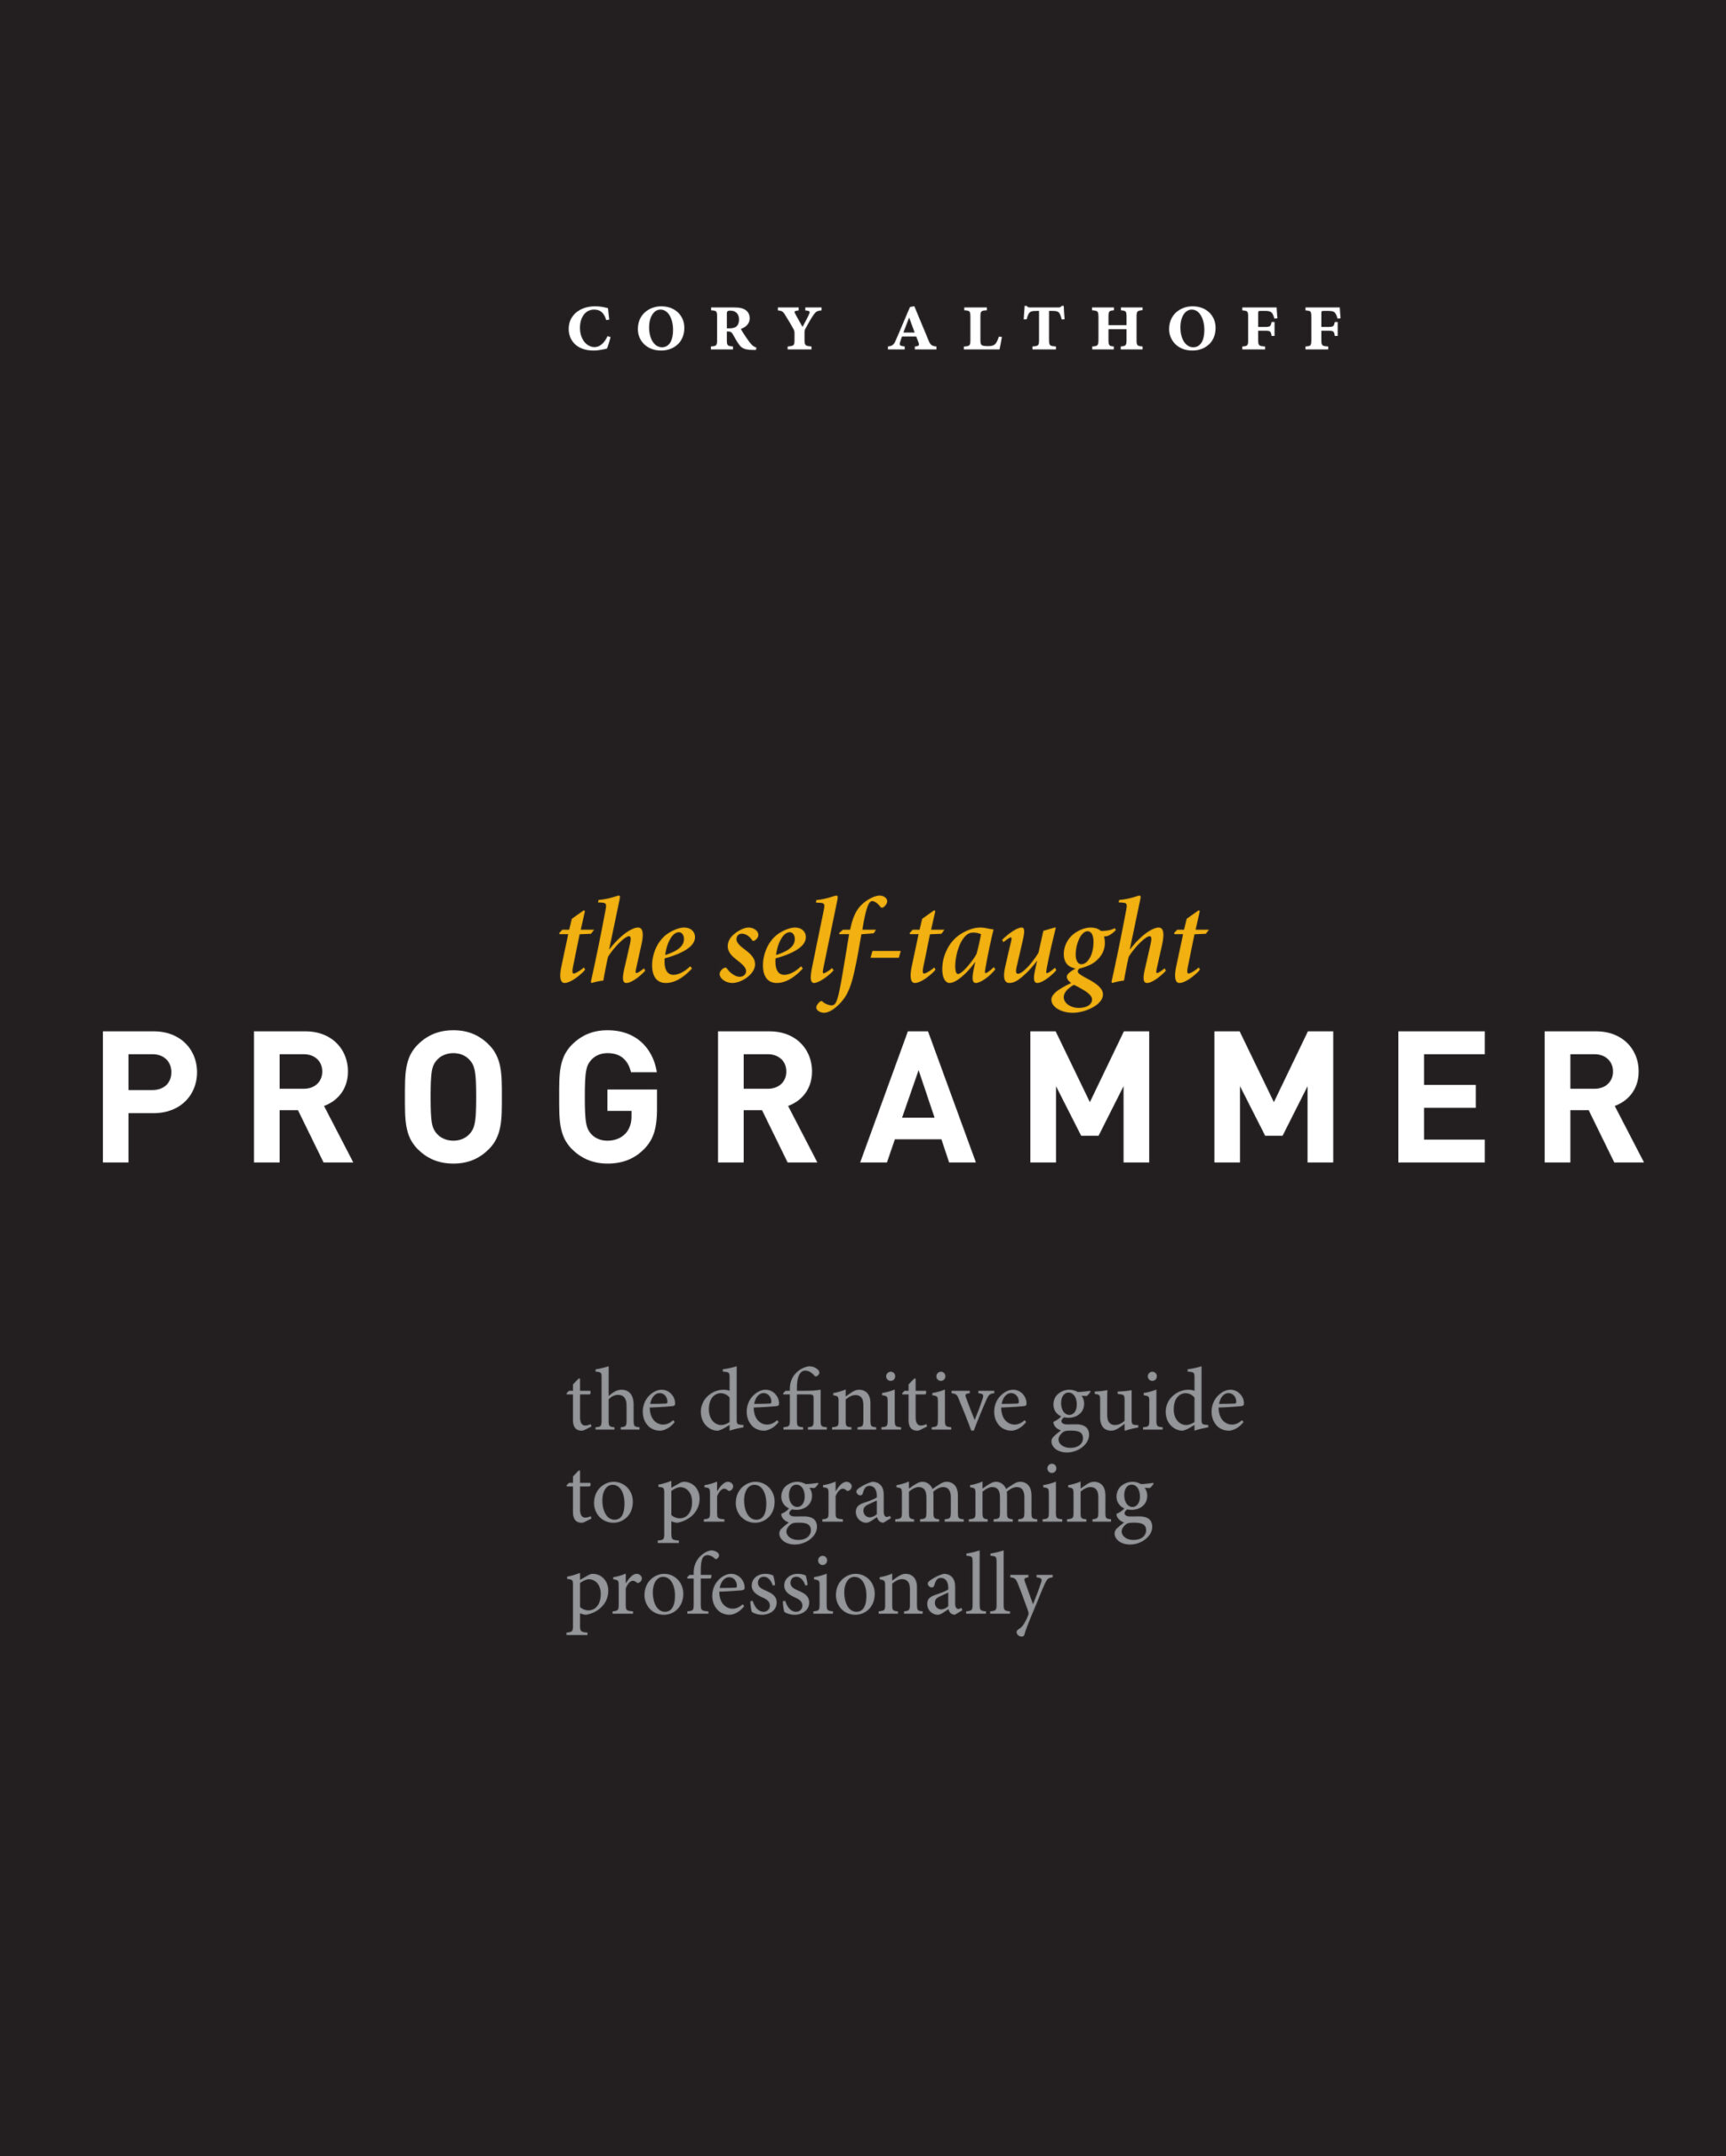 FREE: The Self-Taught Programmer by Cory Althoff